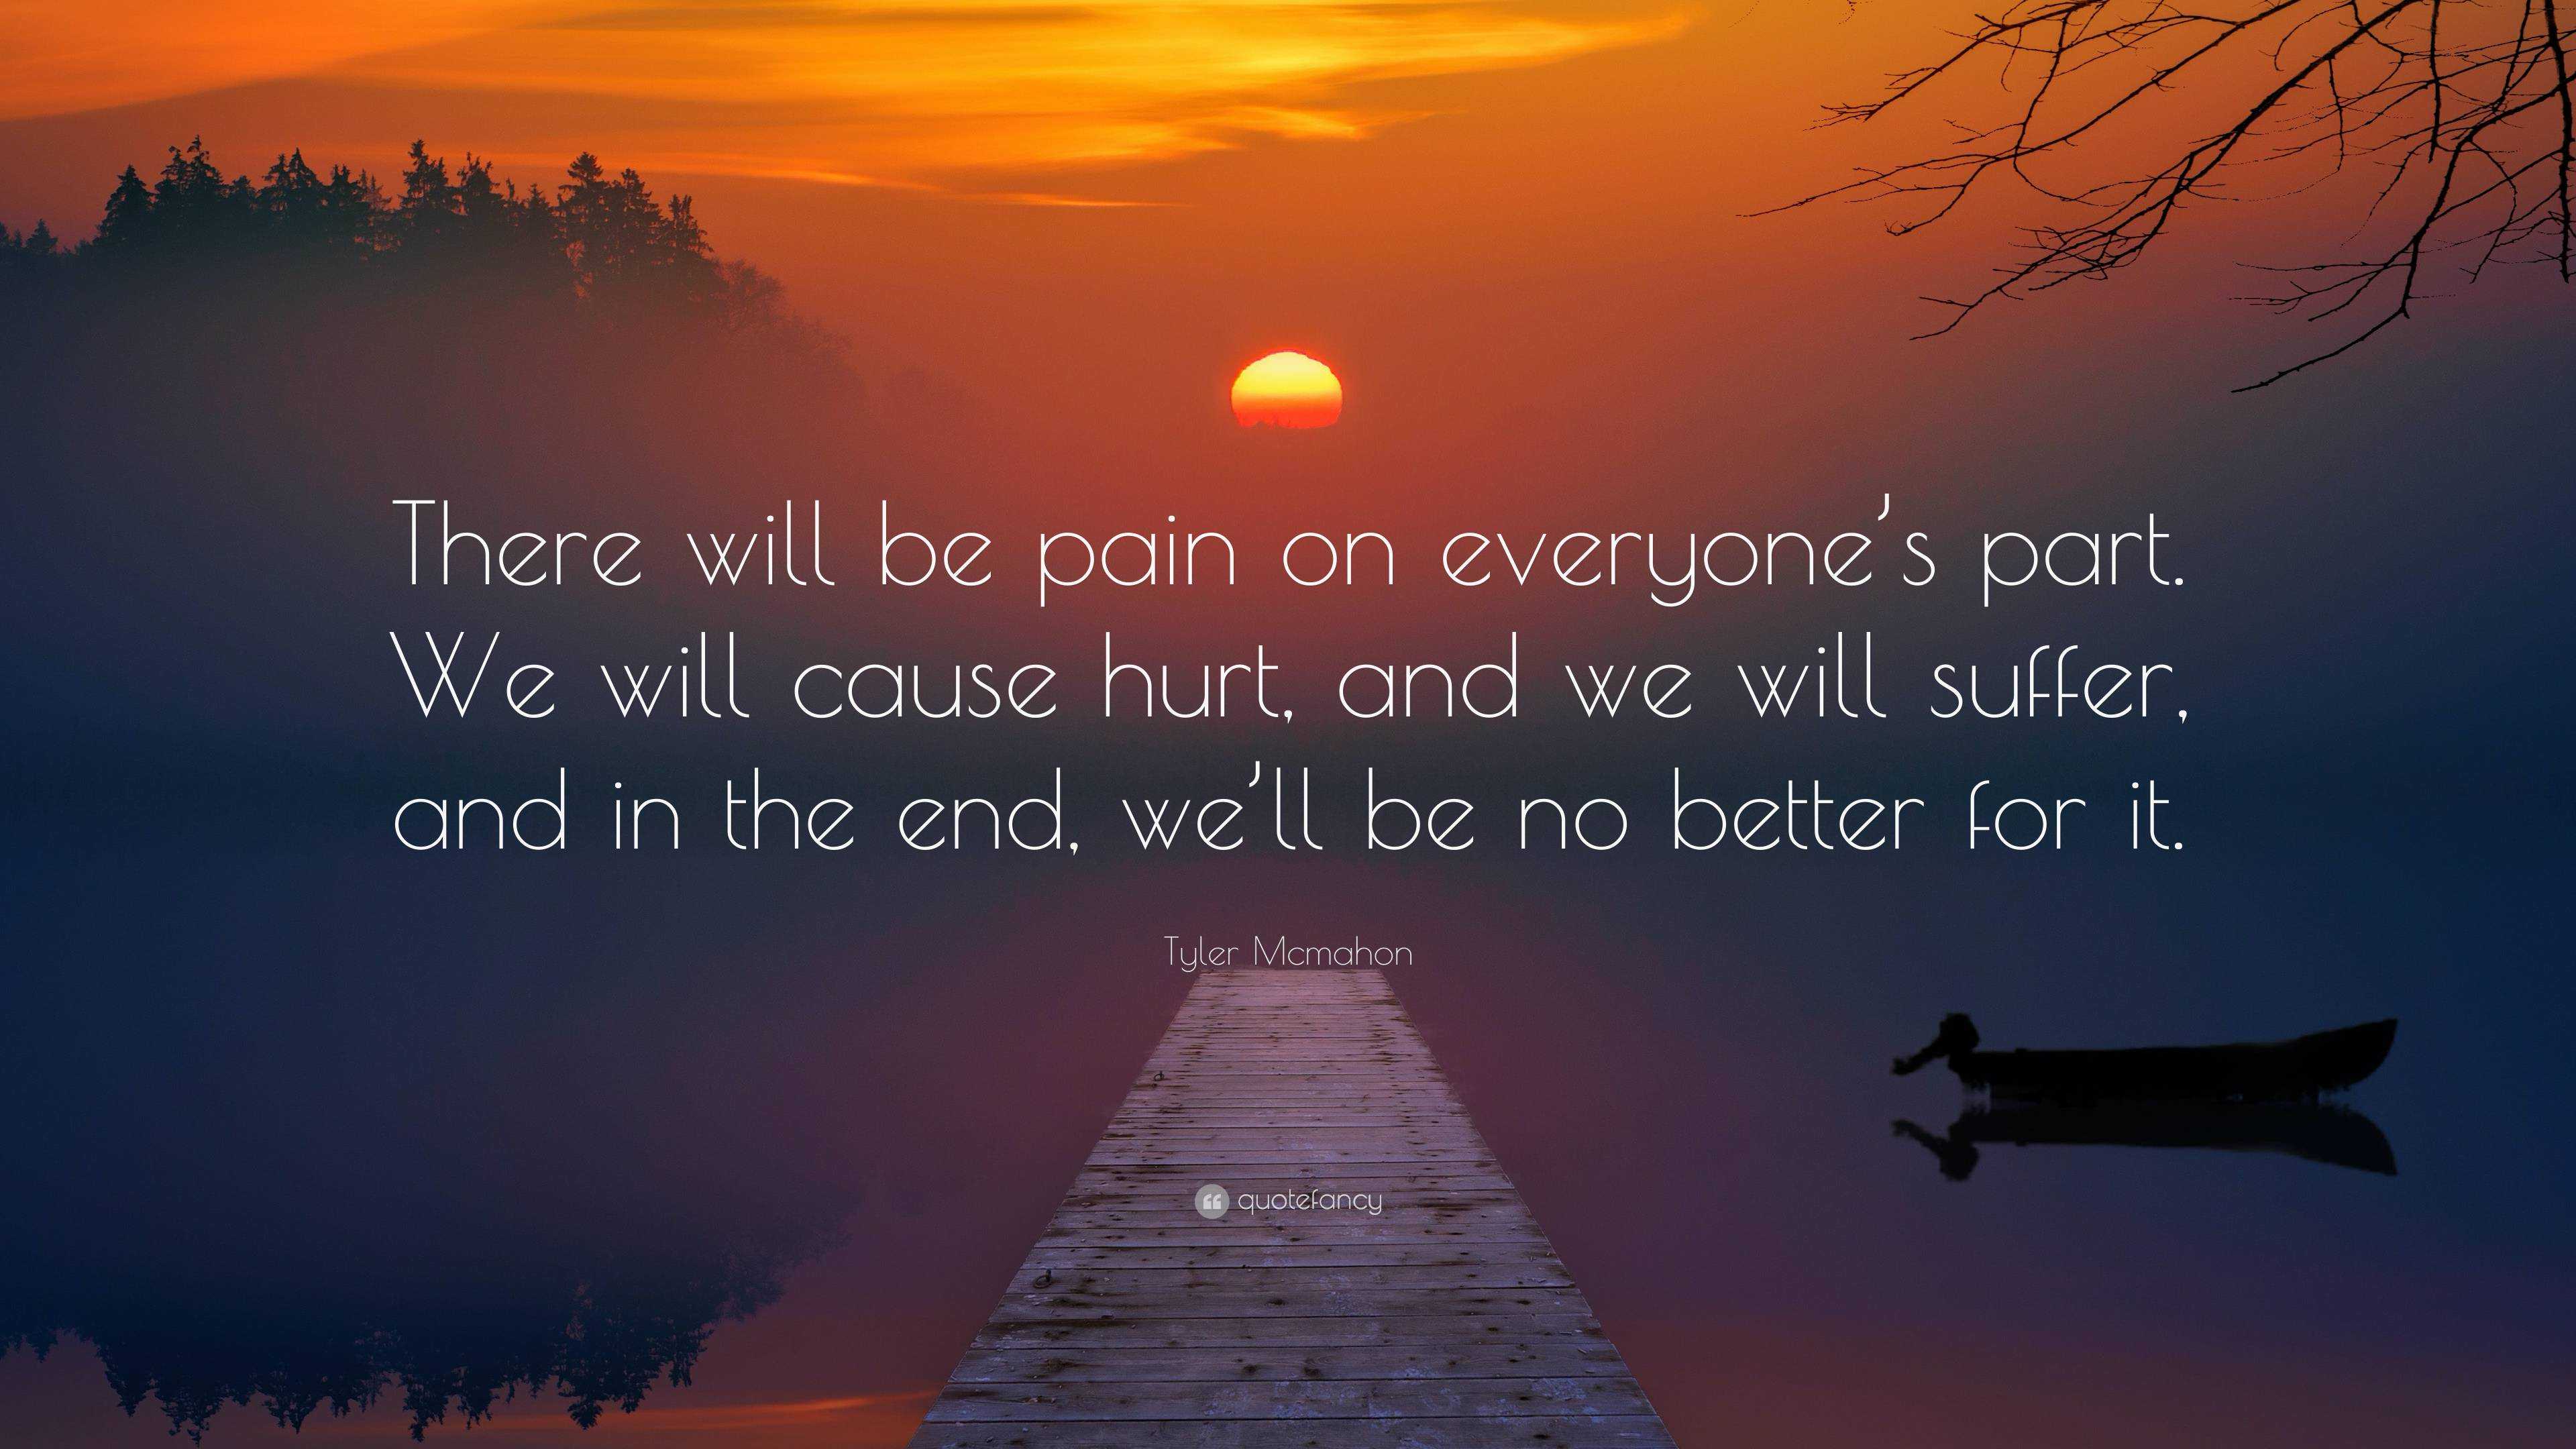 Tyler Mcmahon Quote: “There will be pain on everyone’s part. We will ...